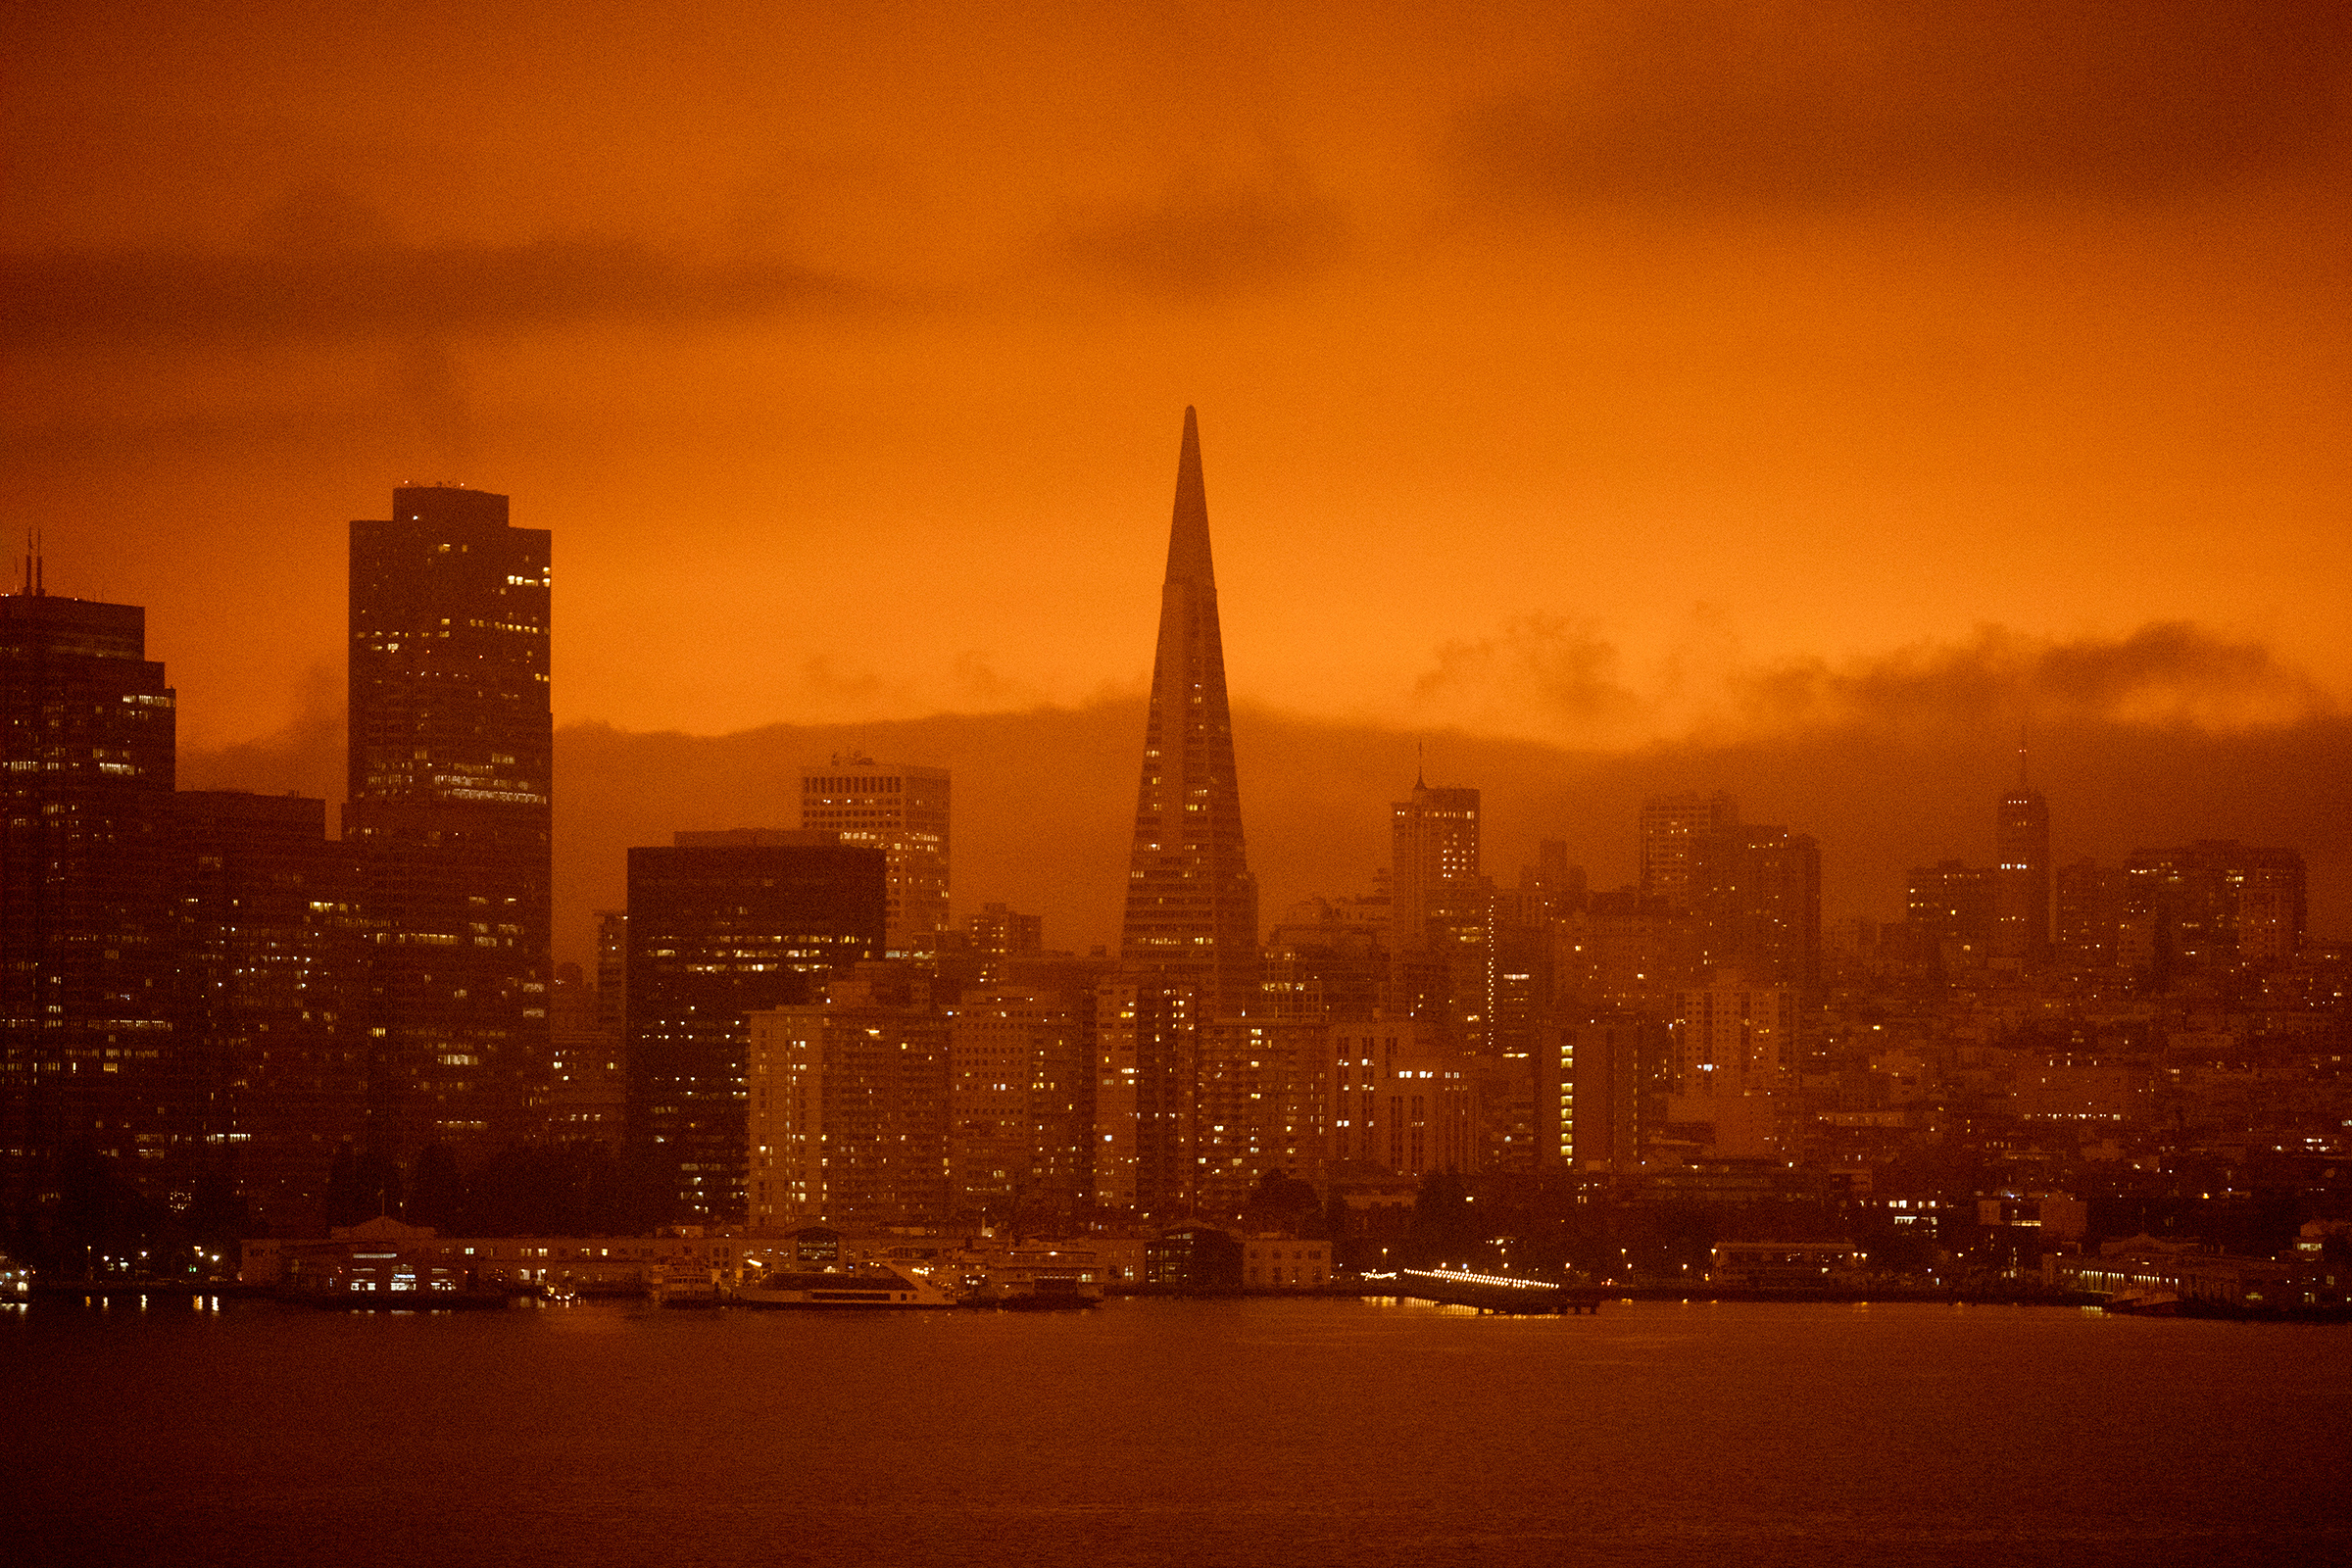 Dark orange skies hang over the San Francisco skyline, as seen from Treasure Island, on Sept. 9, due to multiple wildfires burning across California and Oregon.